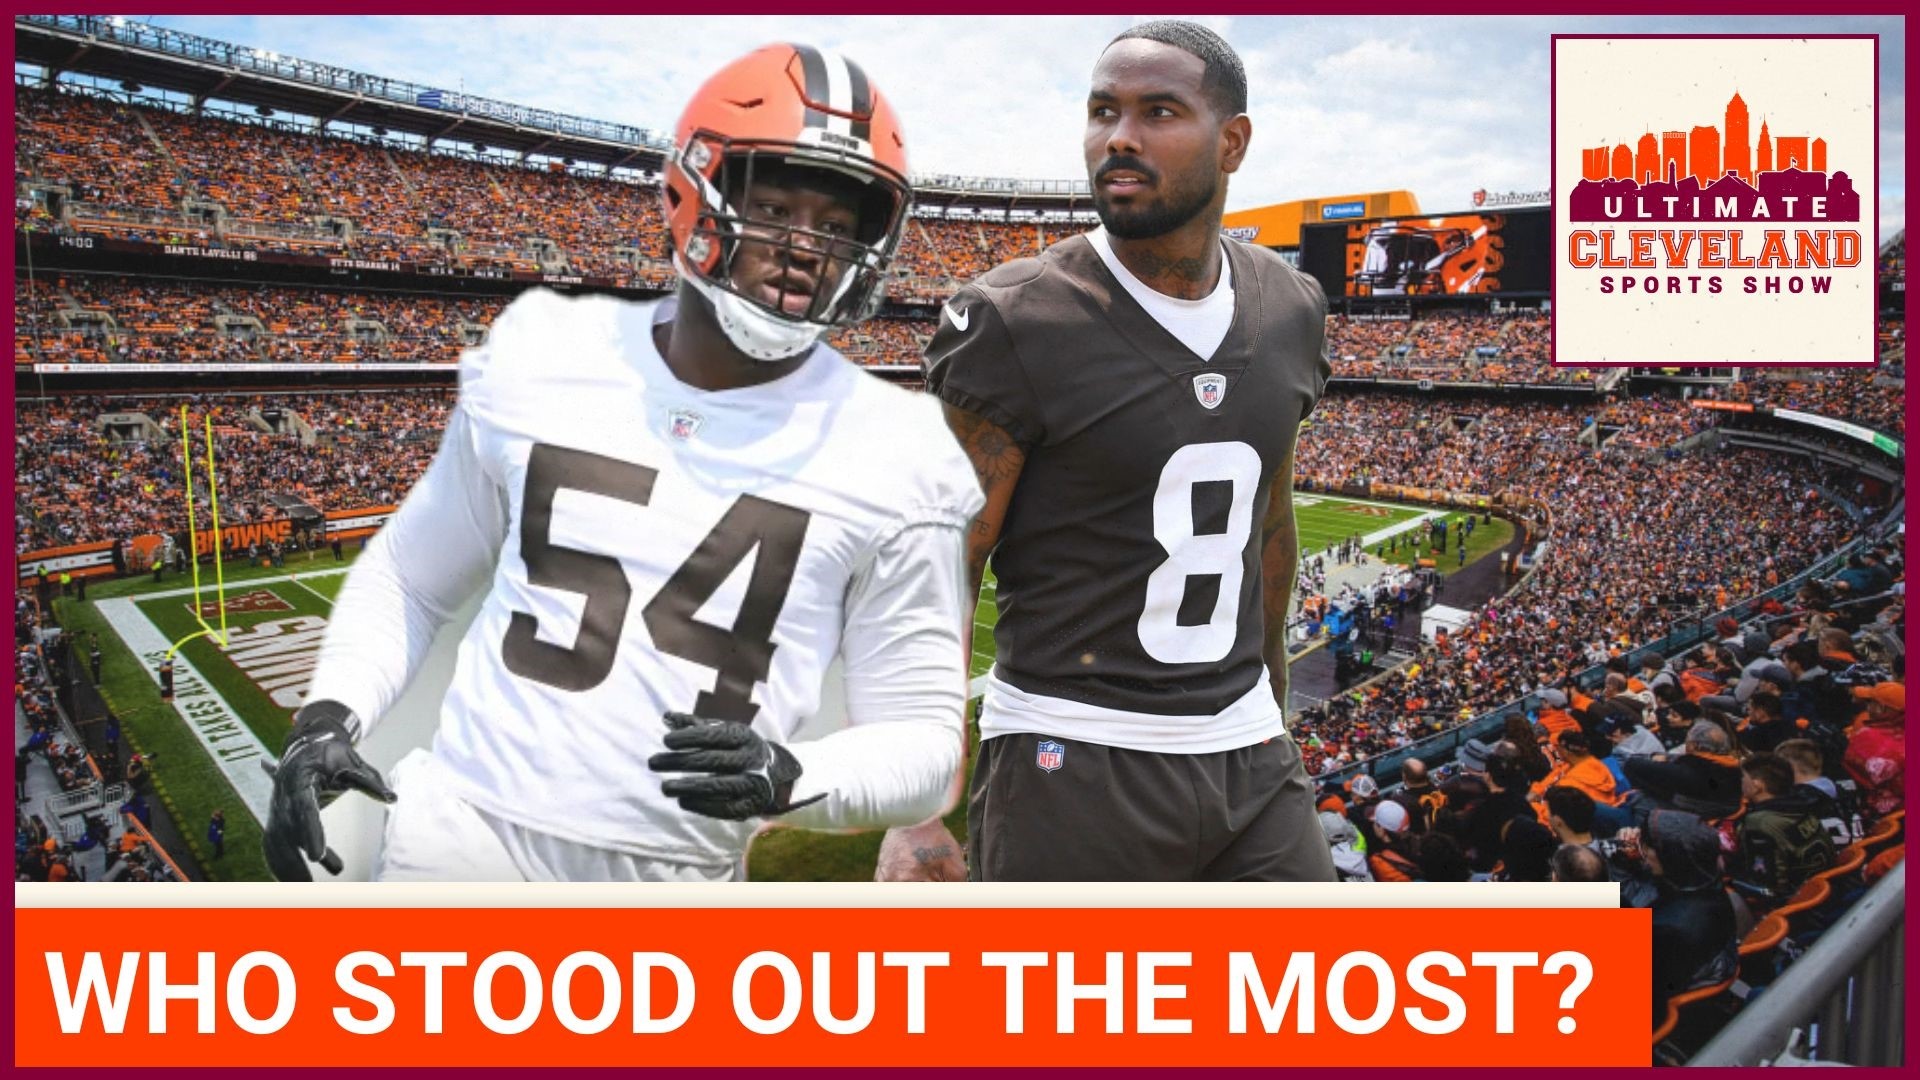 What player on the Cleveland Browns stood out the most at the Greenbrier?